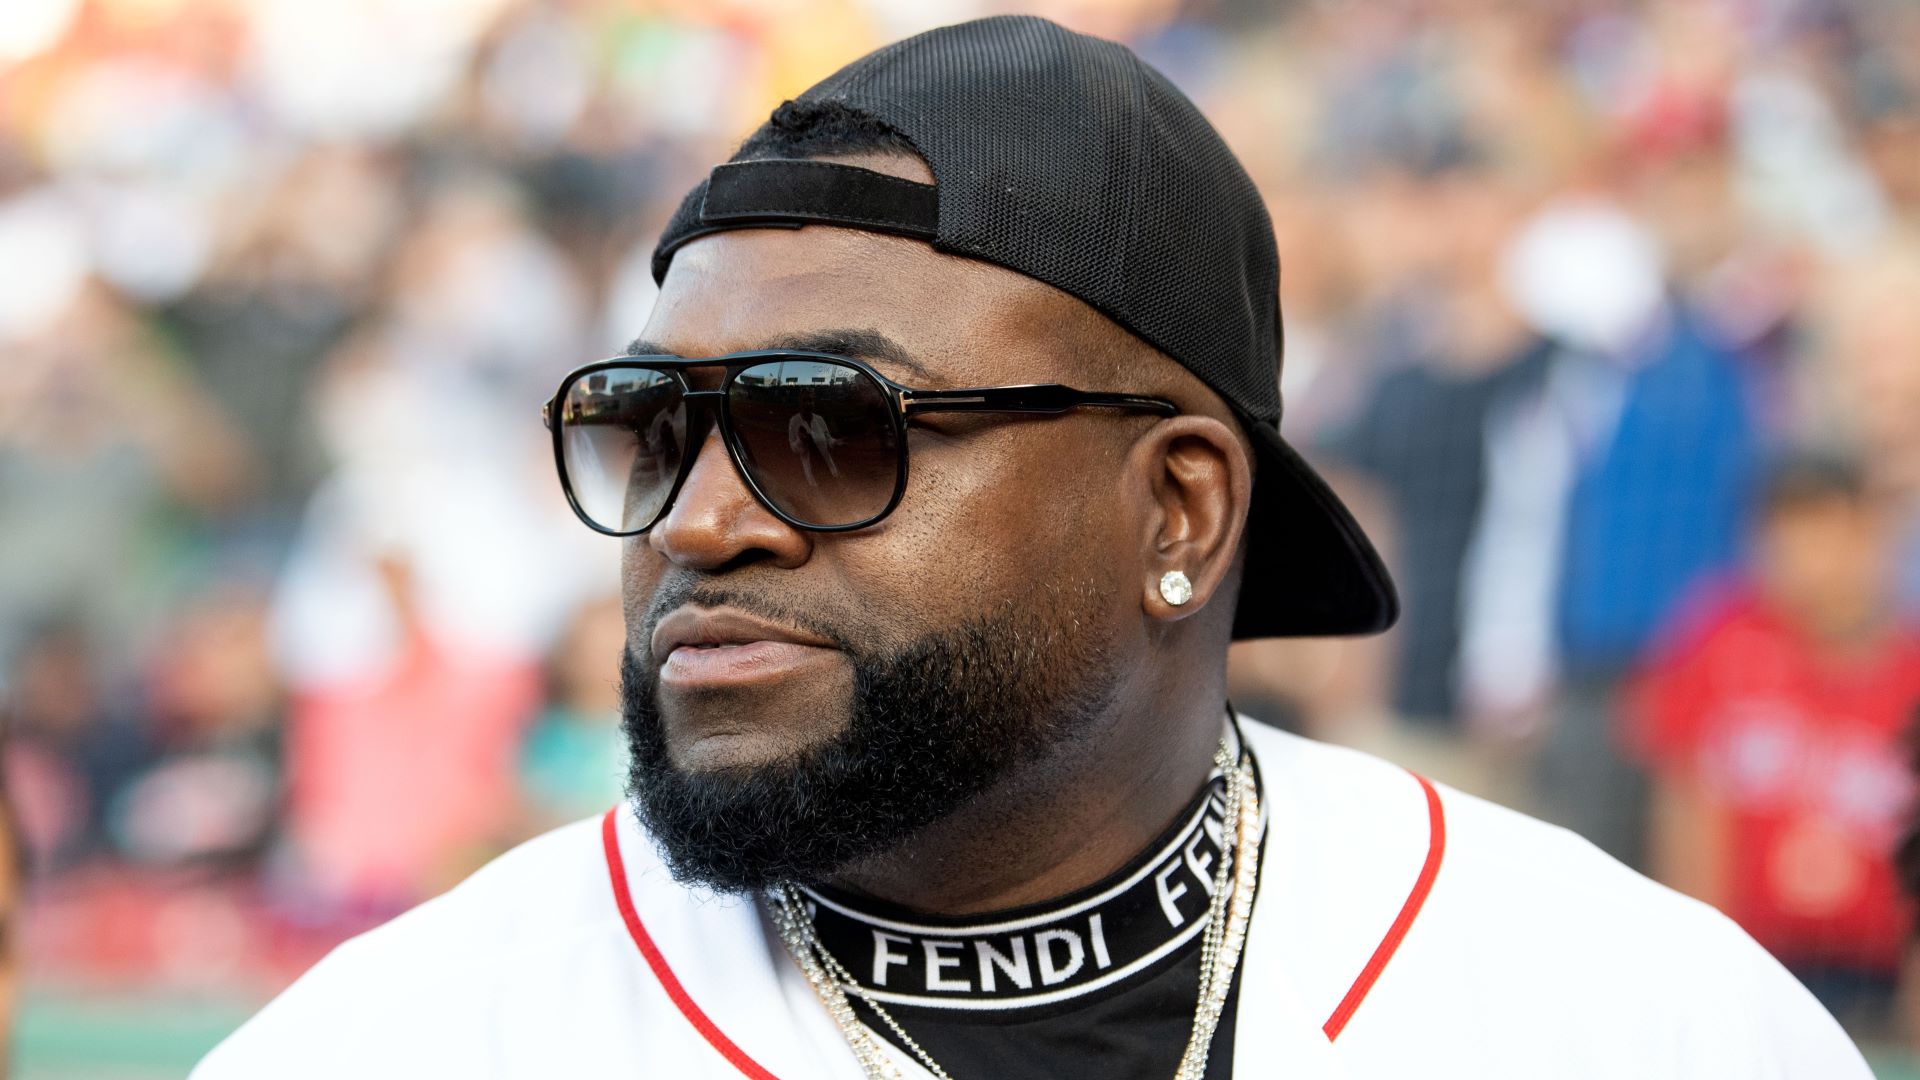 Will Red Sox Hall of Famer David Ortiz make a killing on his Florida home?  